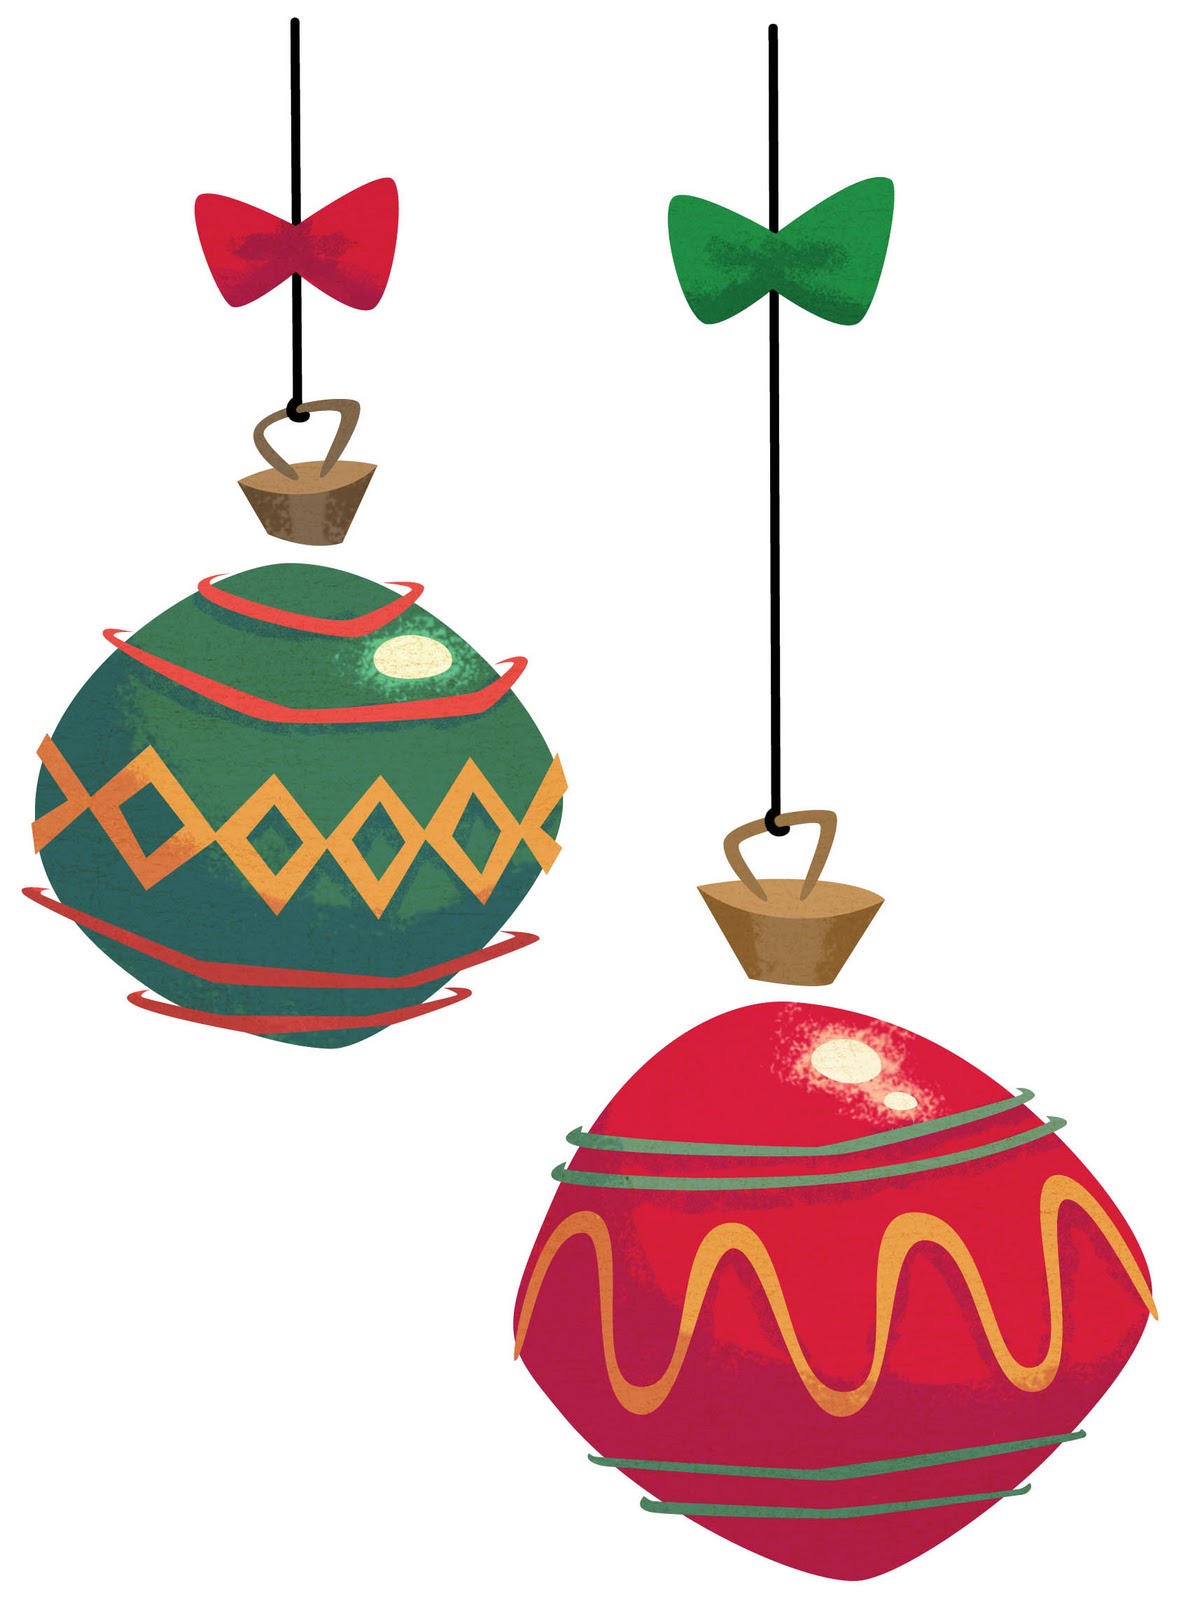 Free Vintage Christmas Cliparts, Download Free Clip Art.